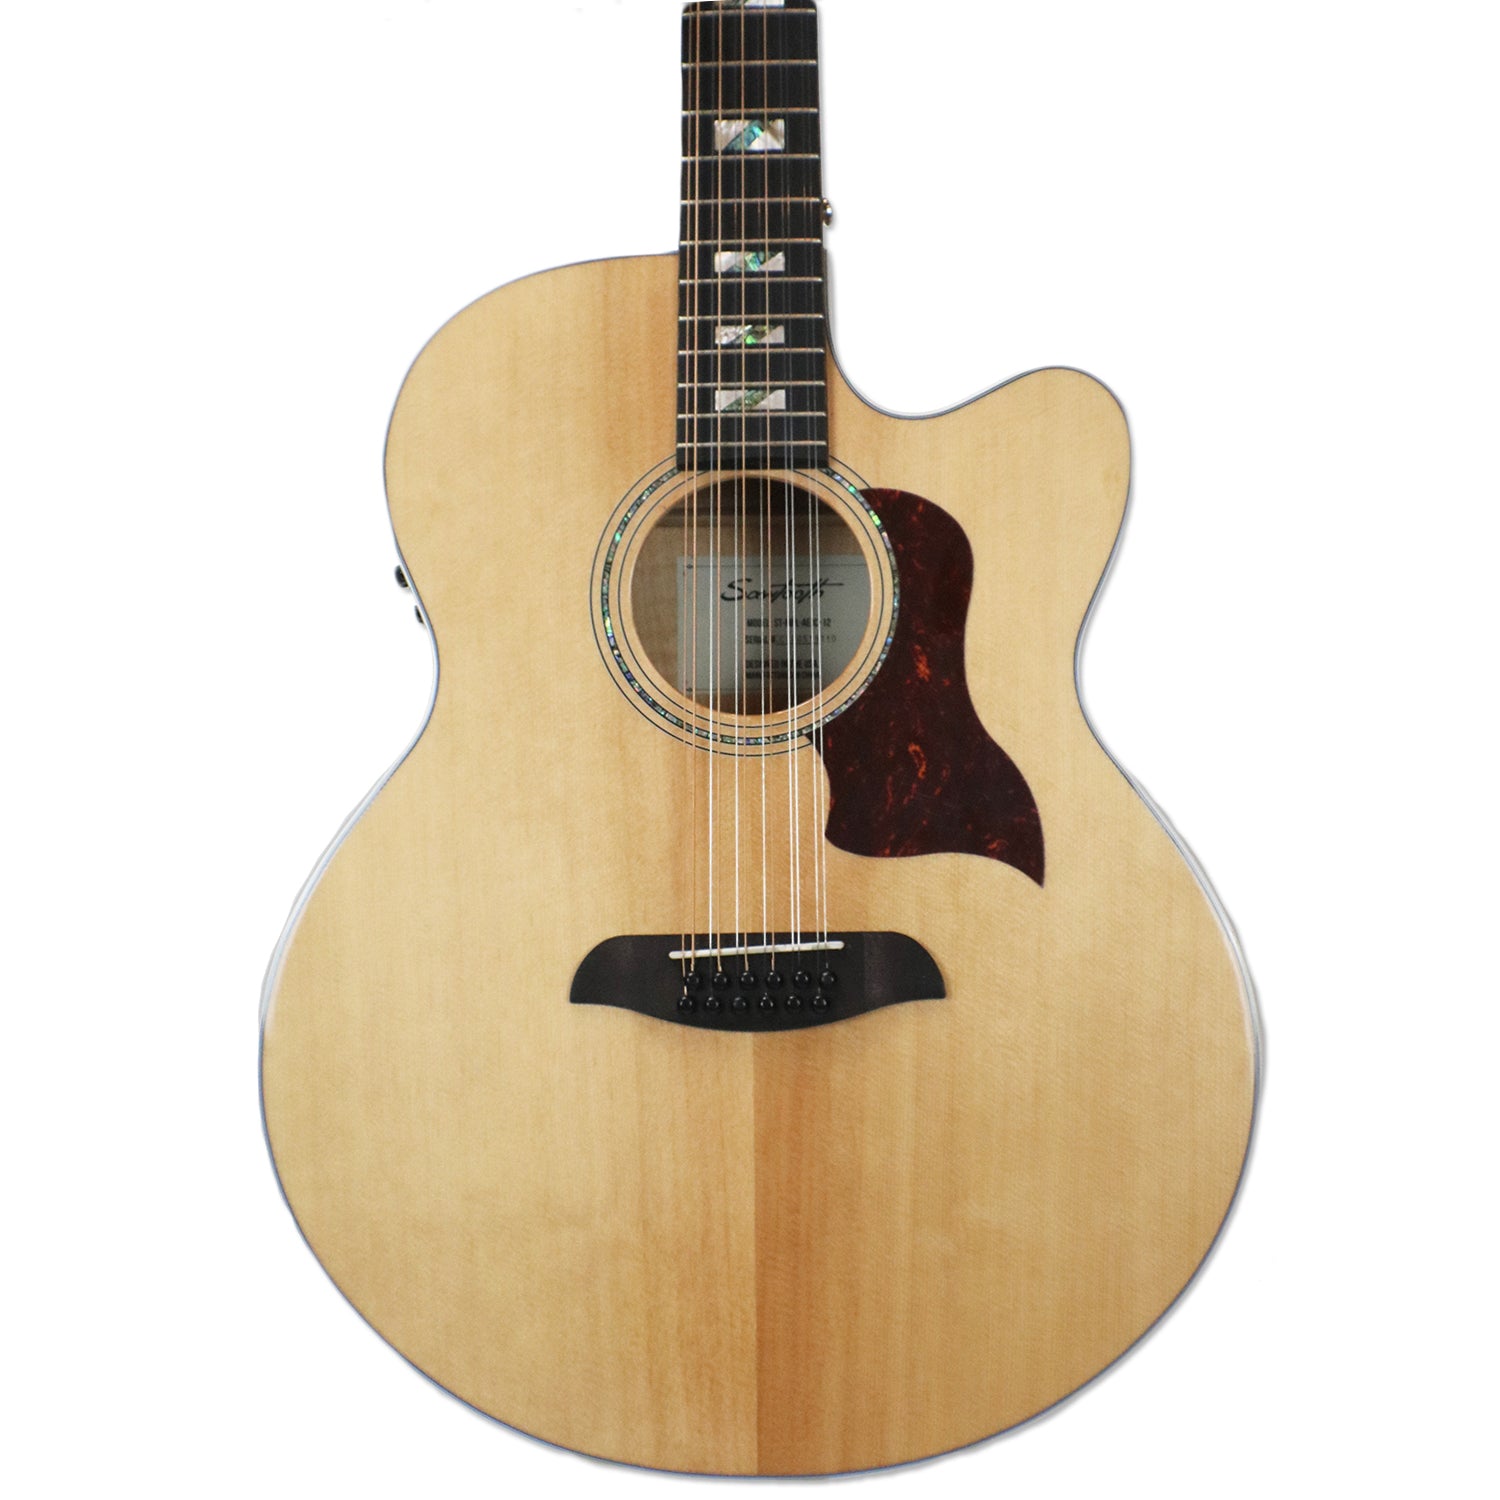 Sawtooth Solid Spruce Top Jumbo Cutaway 12 String Acoustic Electric Guitar  with Flame Maple Back and Sides